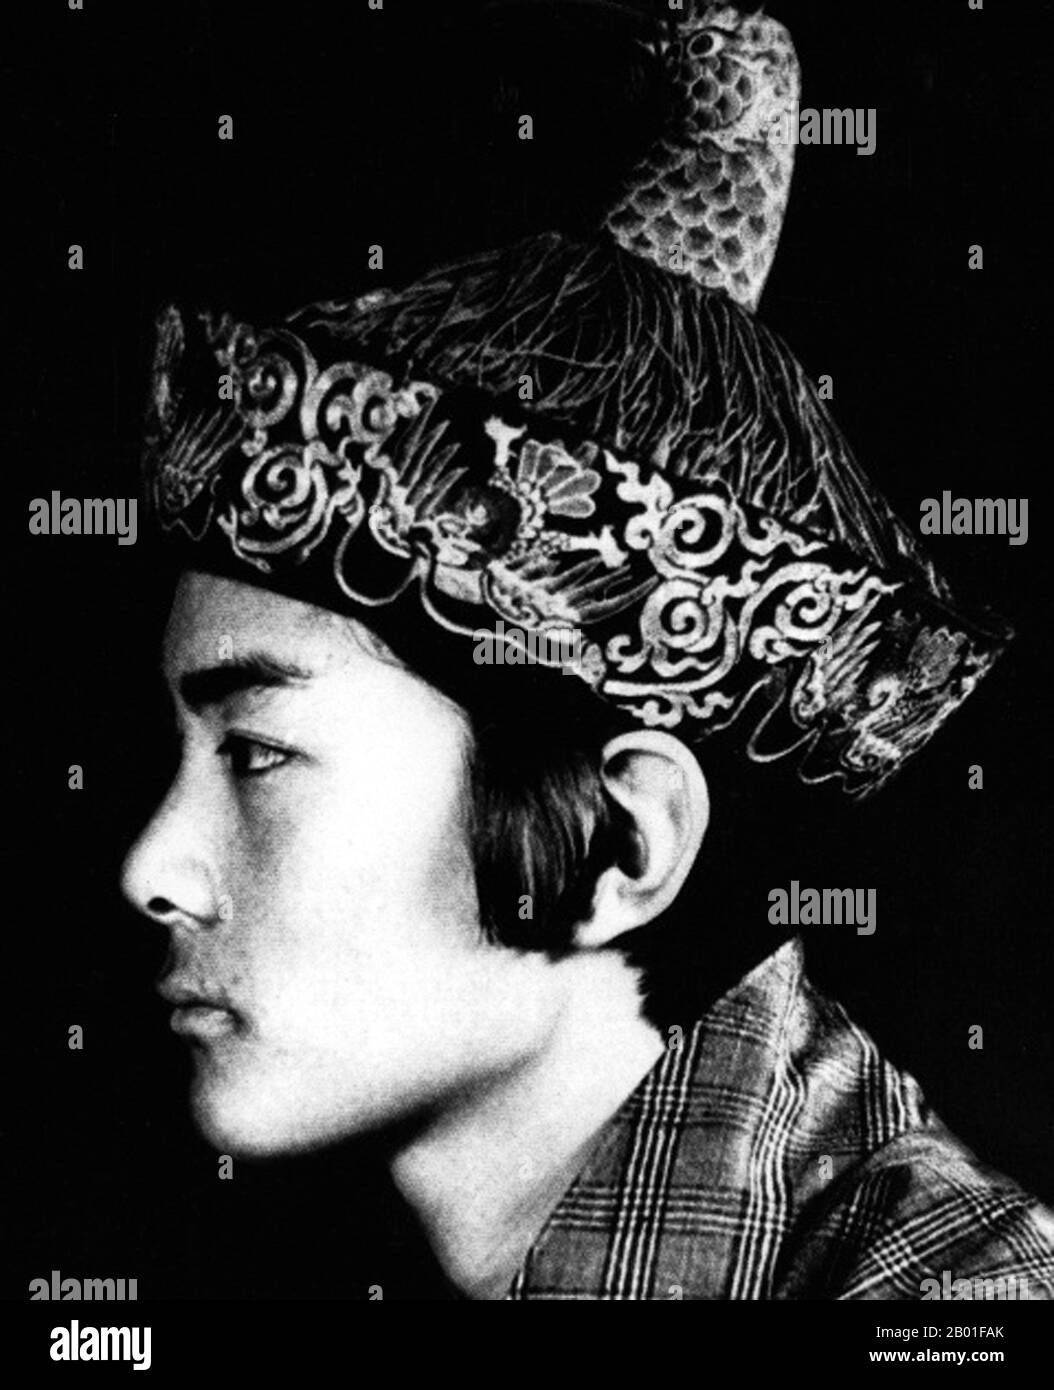 Bhutan: His Majesty Jigme Singye Wangchuck (11 November 1955 -), 4th Druk Gyalpo or 'Dragon King' (r. 1972-2006), c. 1972.  Jigme Singye Wangchuck was the 4th Druk Gyalpo of Bhutan, ruling from 1972 until he abdicated in 2006 in favour of his eldest son, Jigme Khesar Namgyel Wangchuck. He continued the modernisation and democratisation initiatives of his father, and most importantly advocated the use of a 'Gross National Happiness' index to measure the well-being of Bhutanese citizens rather than using Gross Domestic Product. Stock Photo